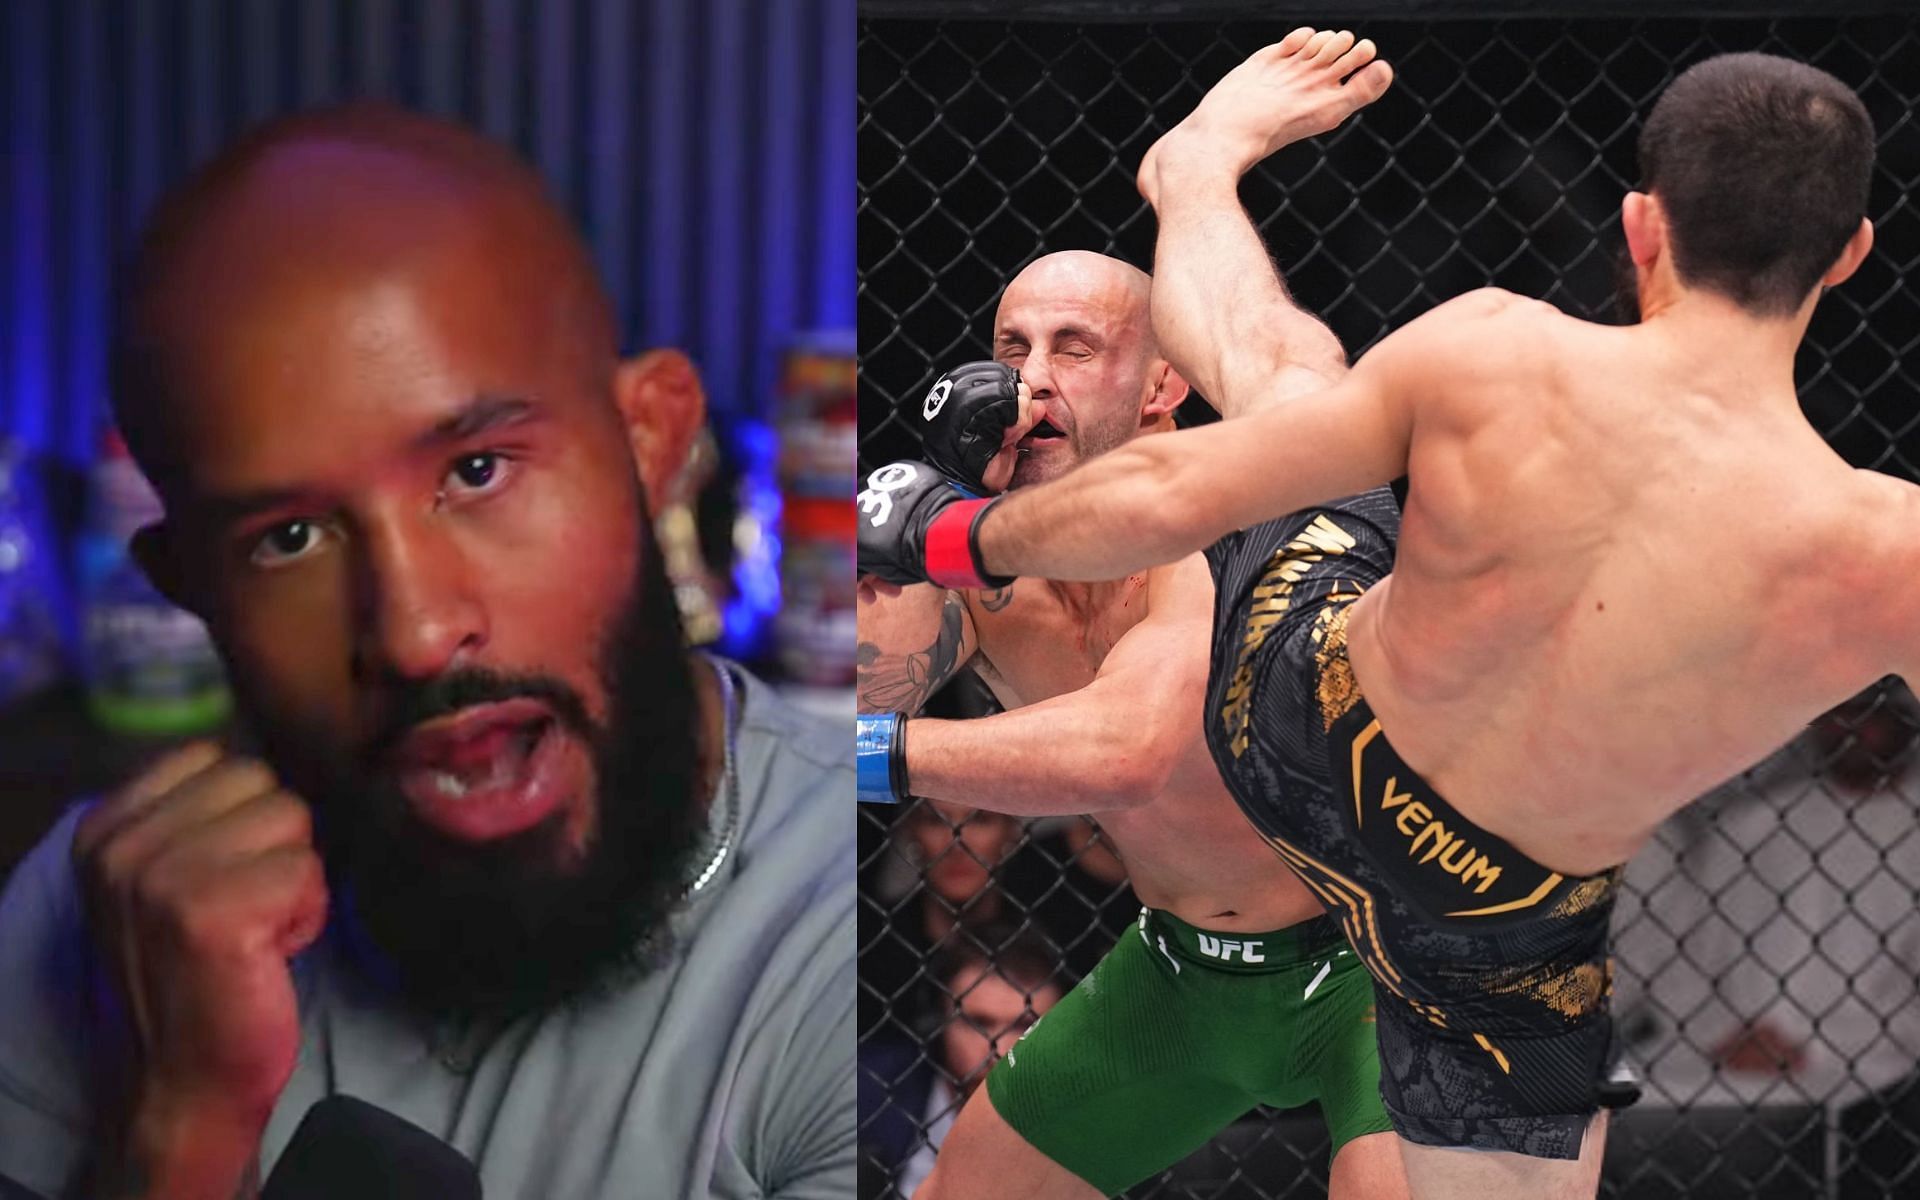 Demetrious Johnson (left) and Islam Makhachev headkick KO over Alexander Volkanovski at UFC 294 (right) [Images Courtesy: @mightygaming on YouTube and @GettyImages] 